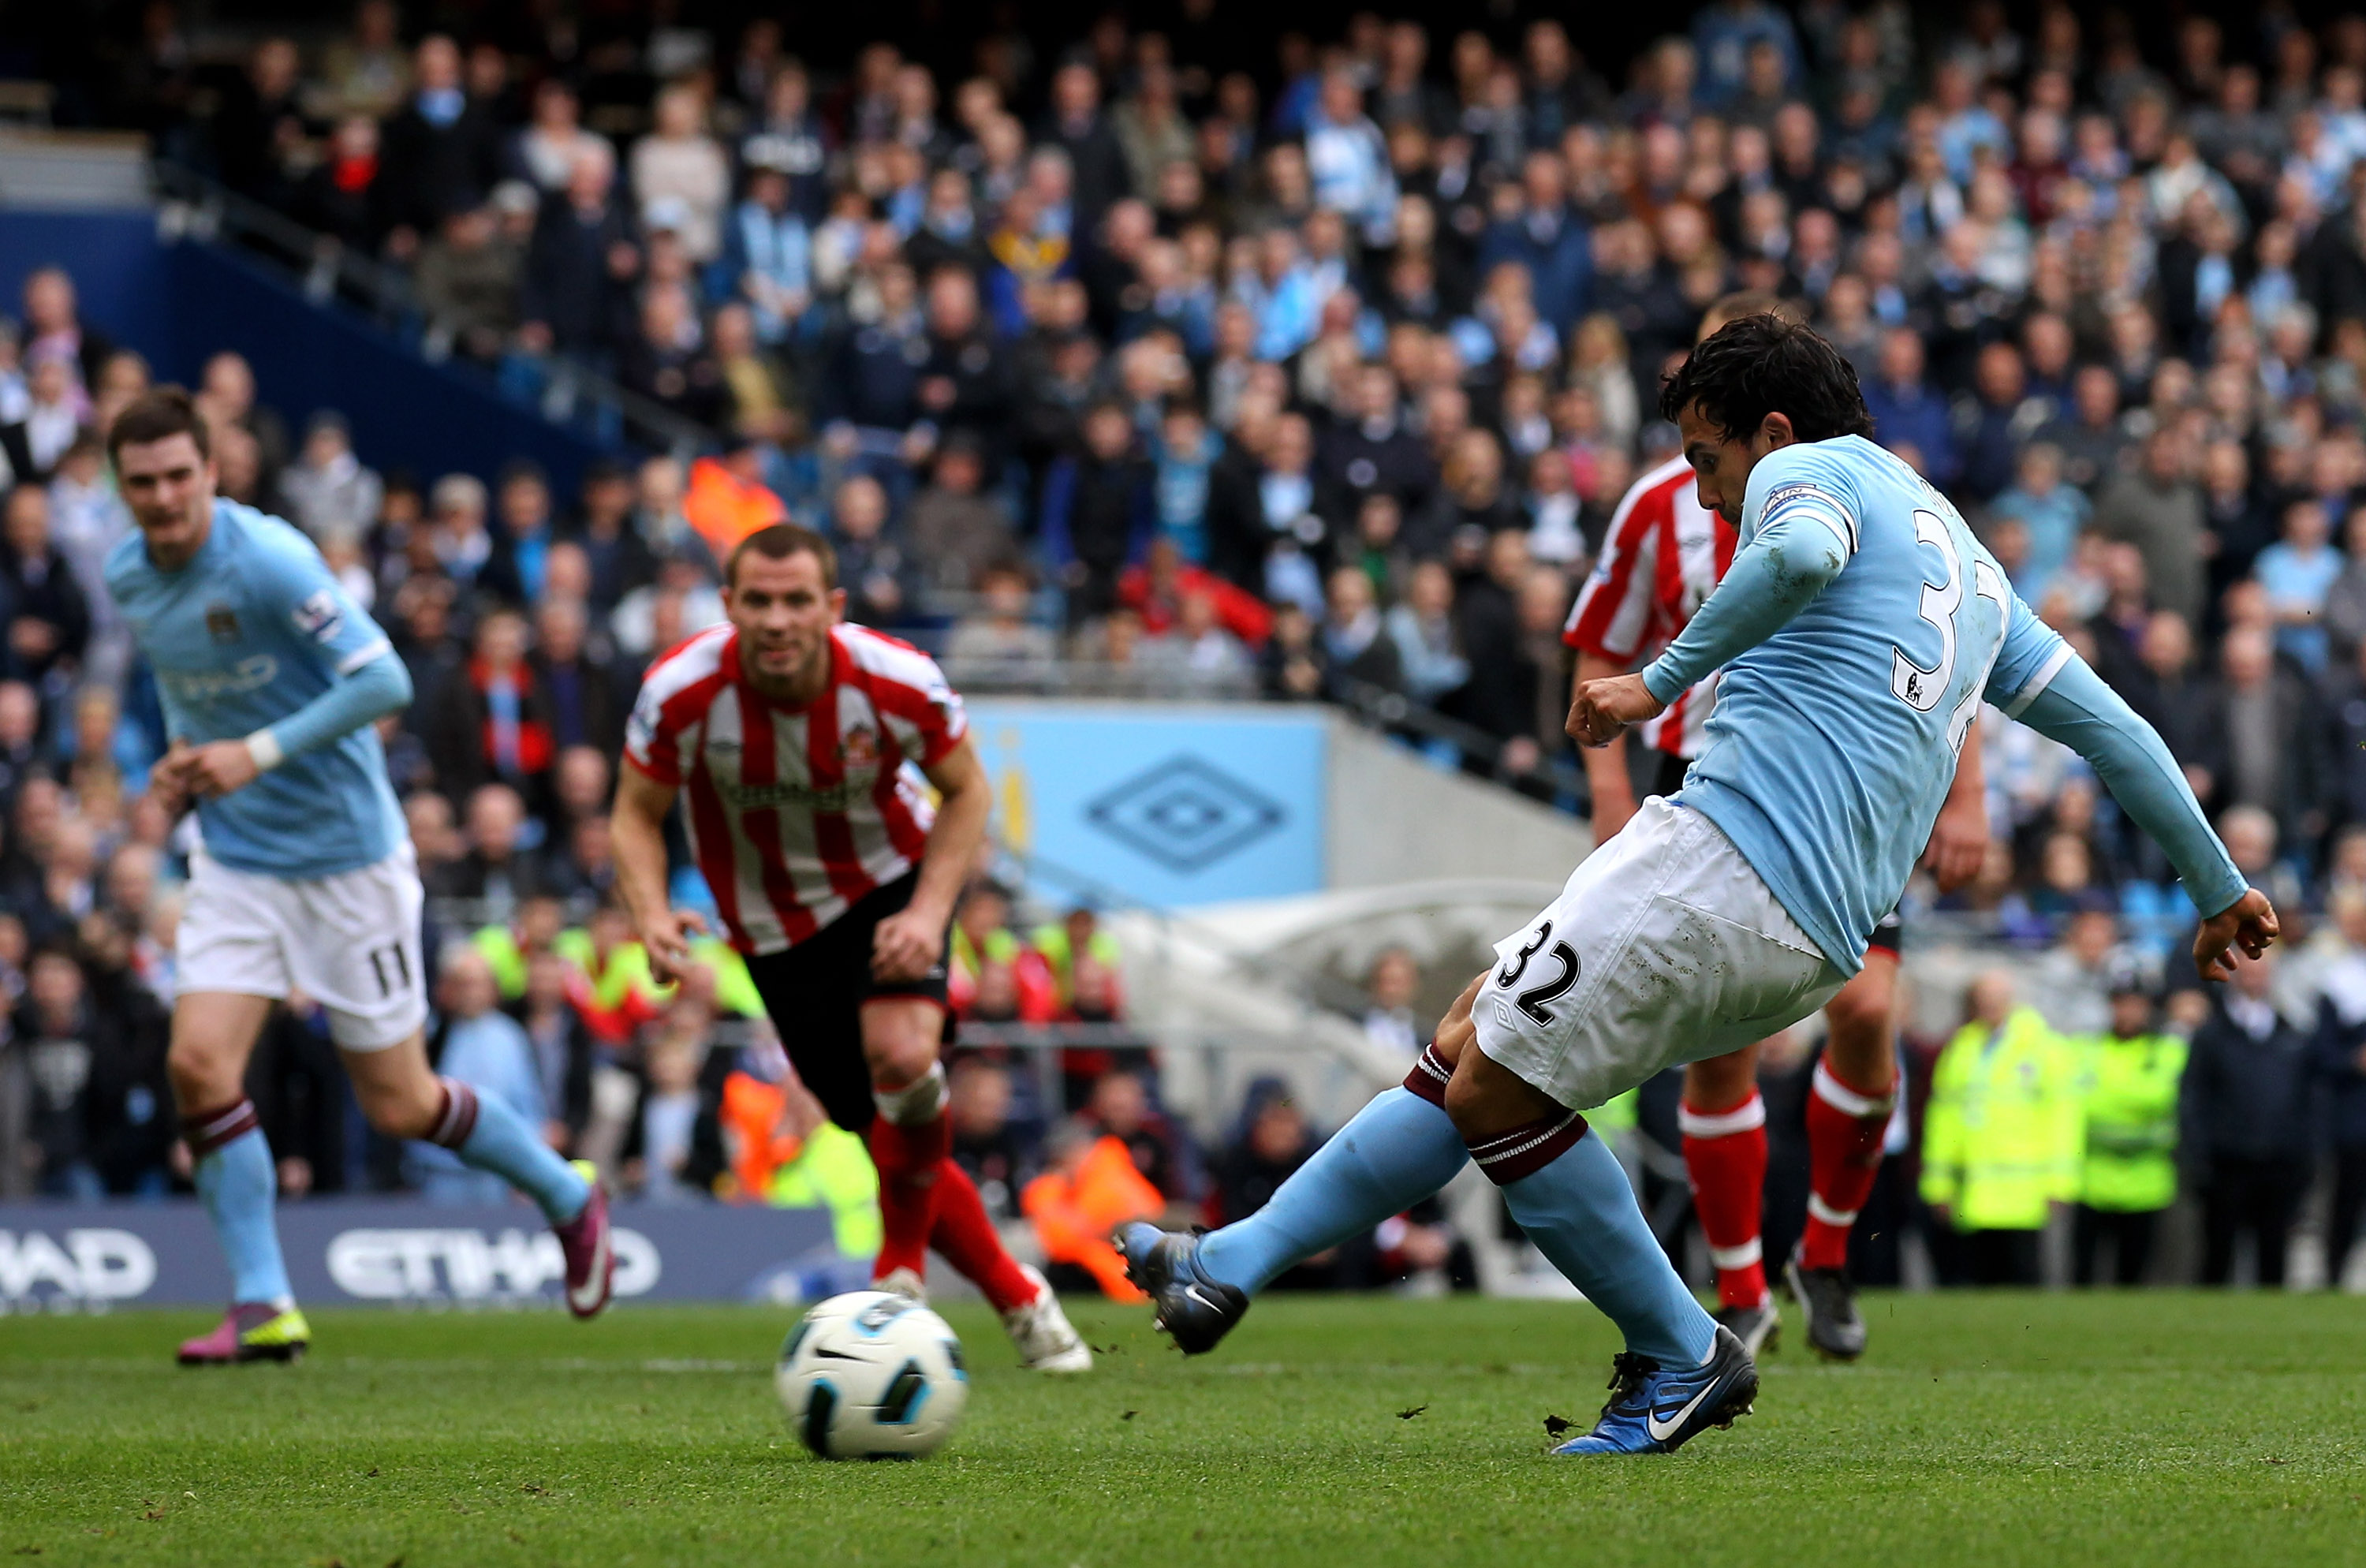 MANCHESTER, ENGLAND - APRIL 03:  Carlos Tevez of Manchester City scores his team's second goal, from a penalty, during the Barclays Premier League match between Manchester City and Sunderland at the City of Manchester Stadium on April 3, 2011 in Mancheste